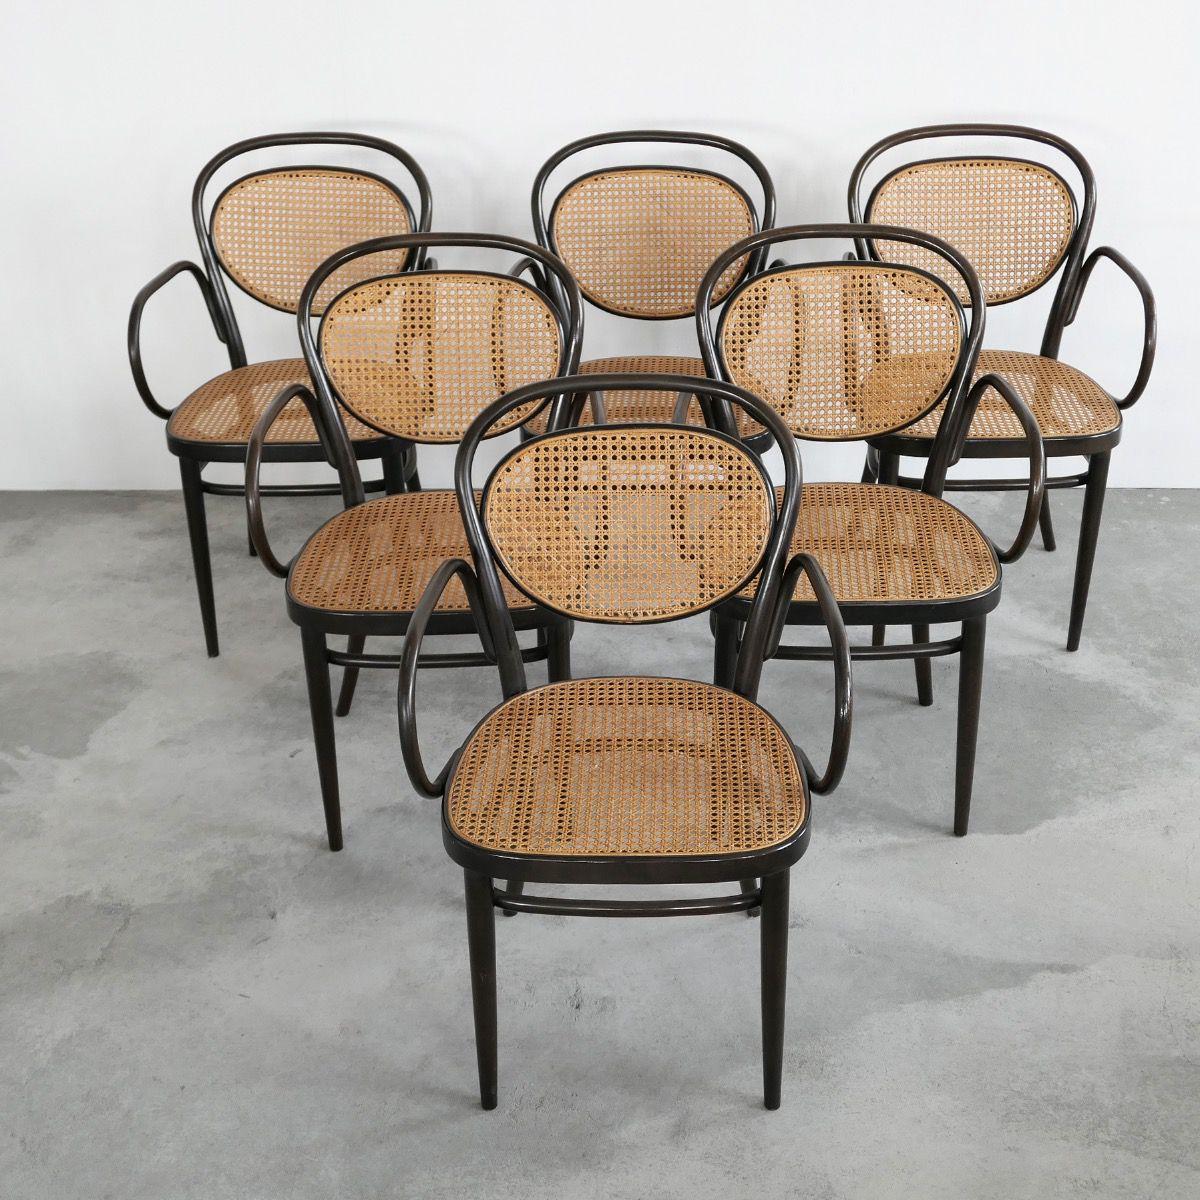 Thonet 215RF armchairs, set of 6. Germany, late 1970s.

Beautiful set of 6 bentwood armchairs by Thonet. This is model 215RF, which means 'coffee house' with arm rests. 

Great color and combination of bentwood and webbing. Very fashionable and